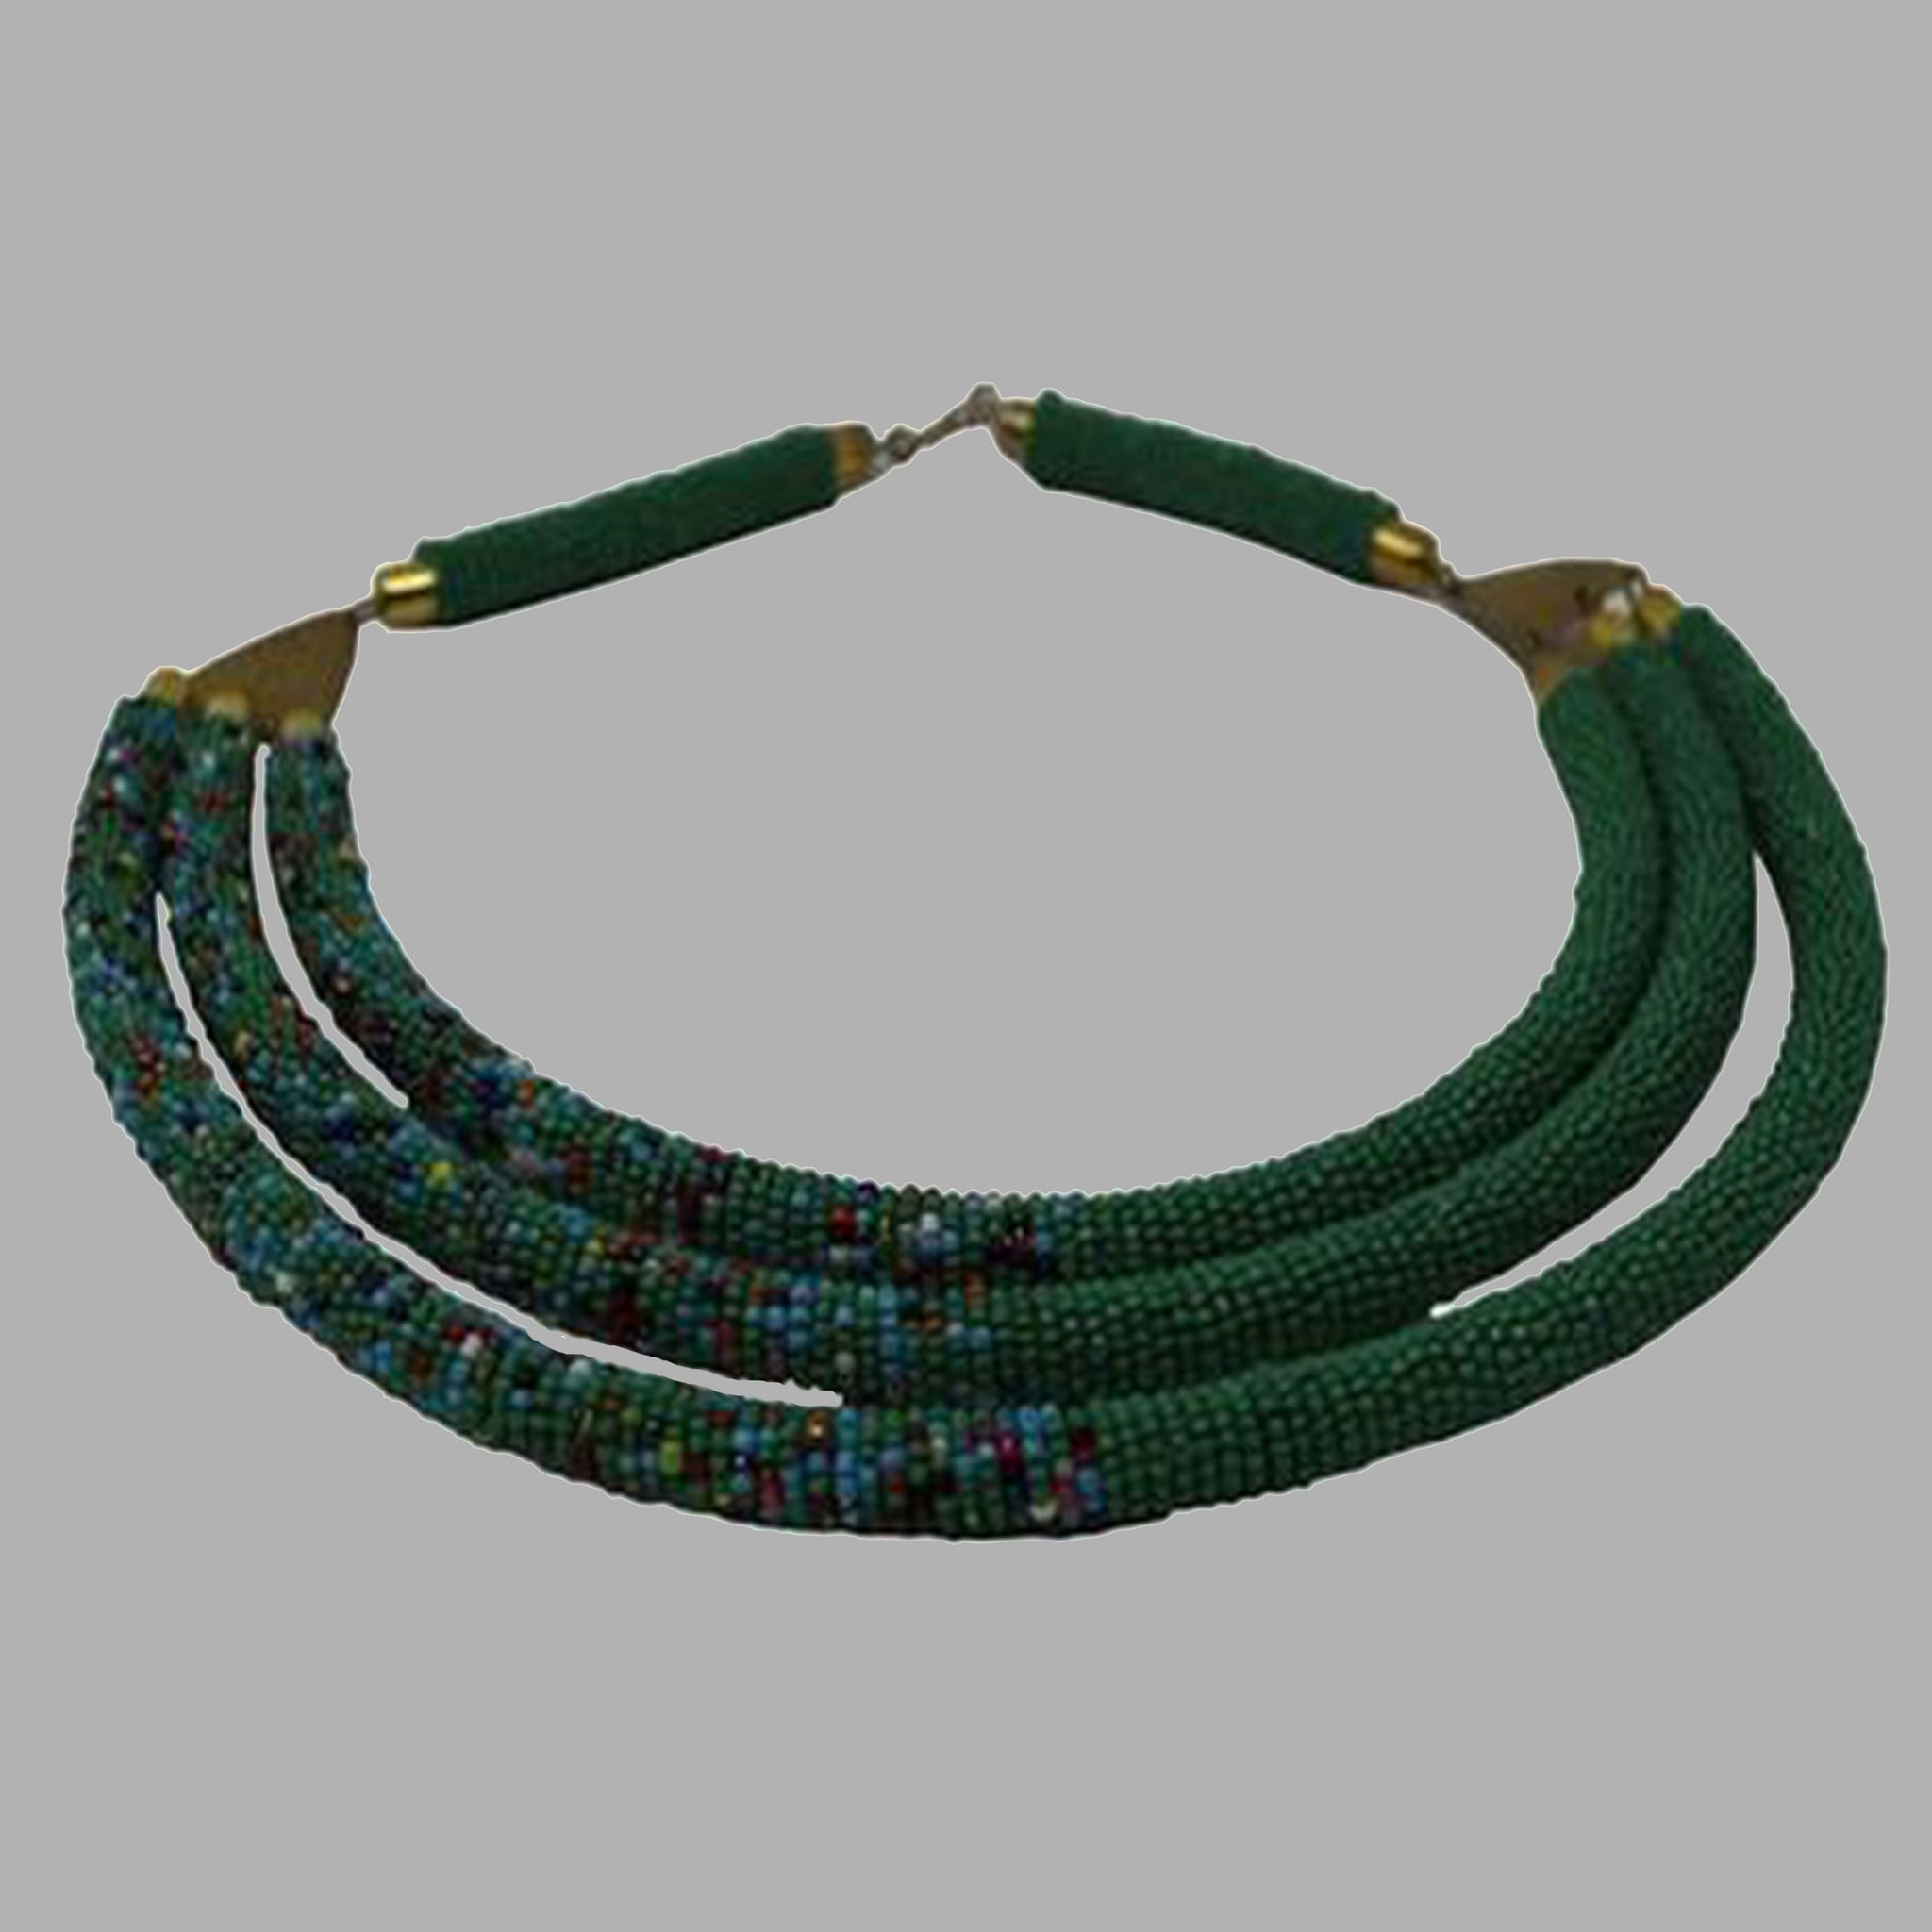 Contemporary Beaded Necklace beading patterns beaded jewelry for women and girls in green color design south african tradition jewelry